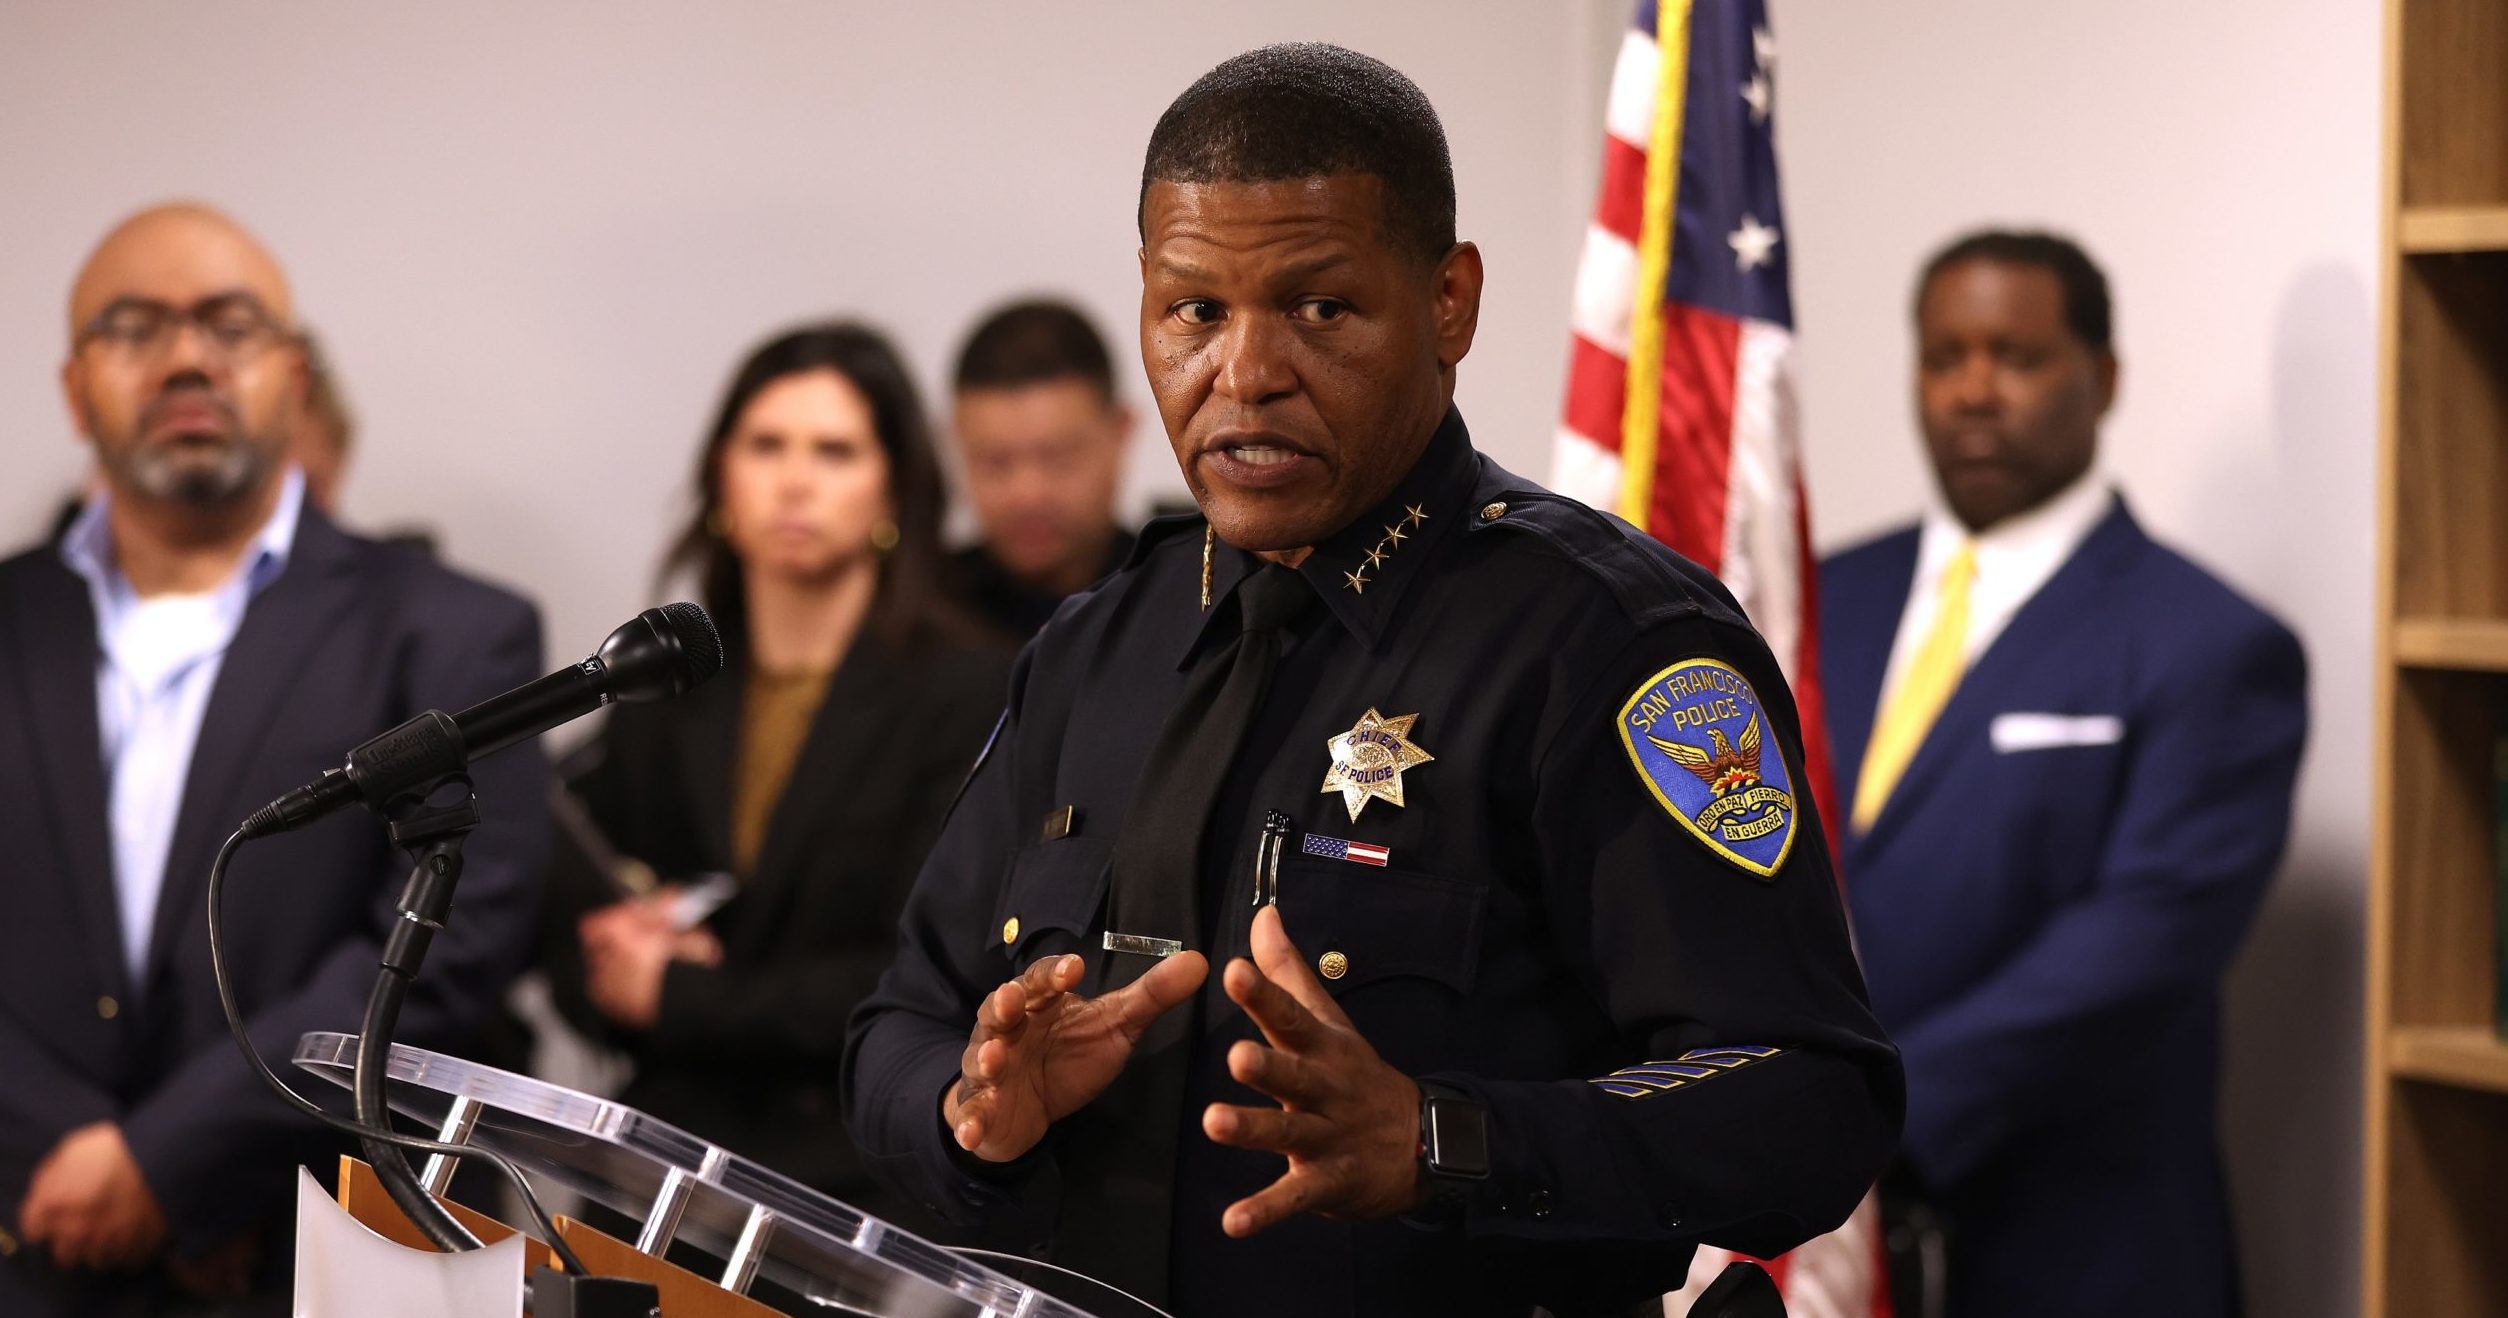 Chief Bill Scott of the San Francisco Police Department speaks during a news conference in San Francisco on Oct. 31.